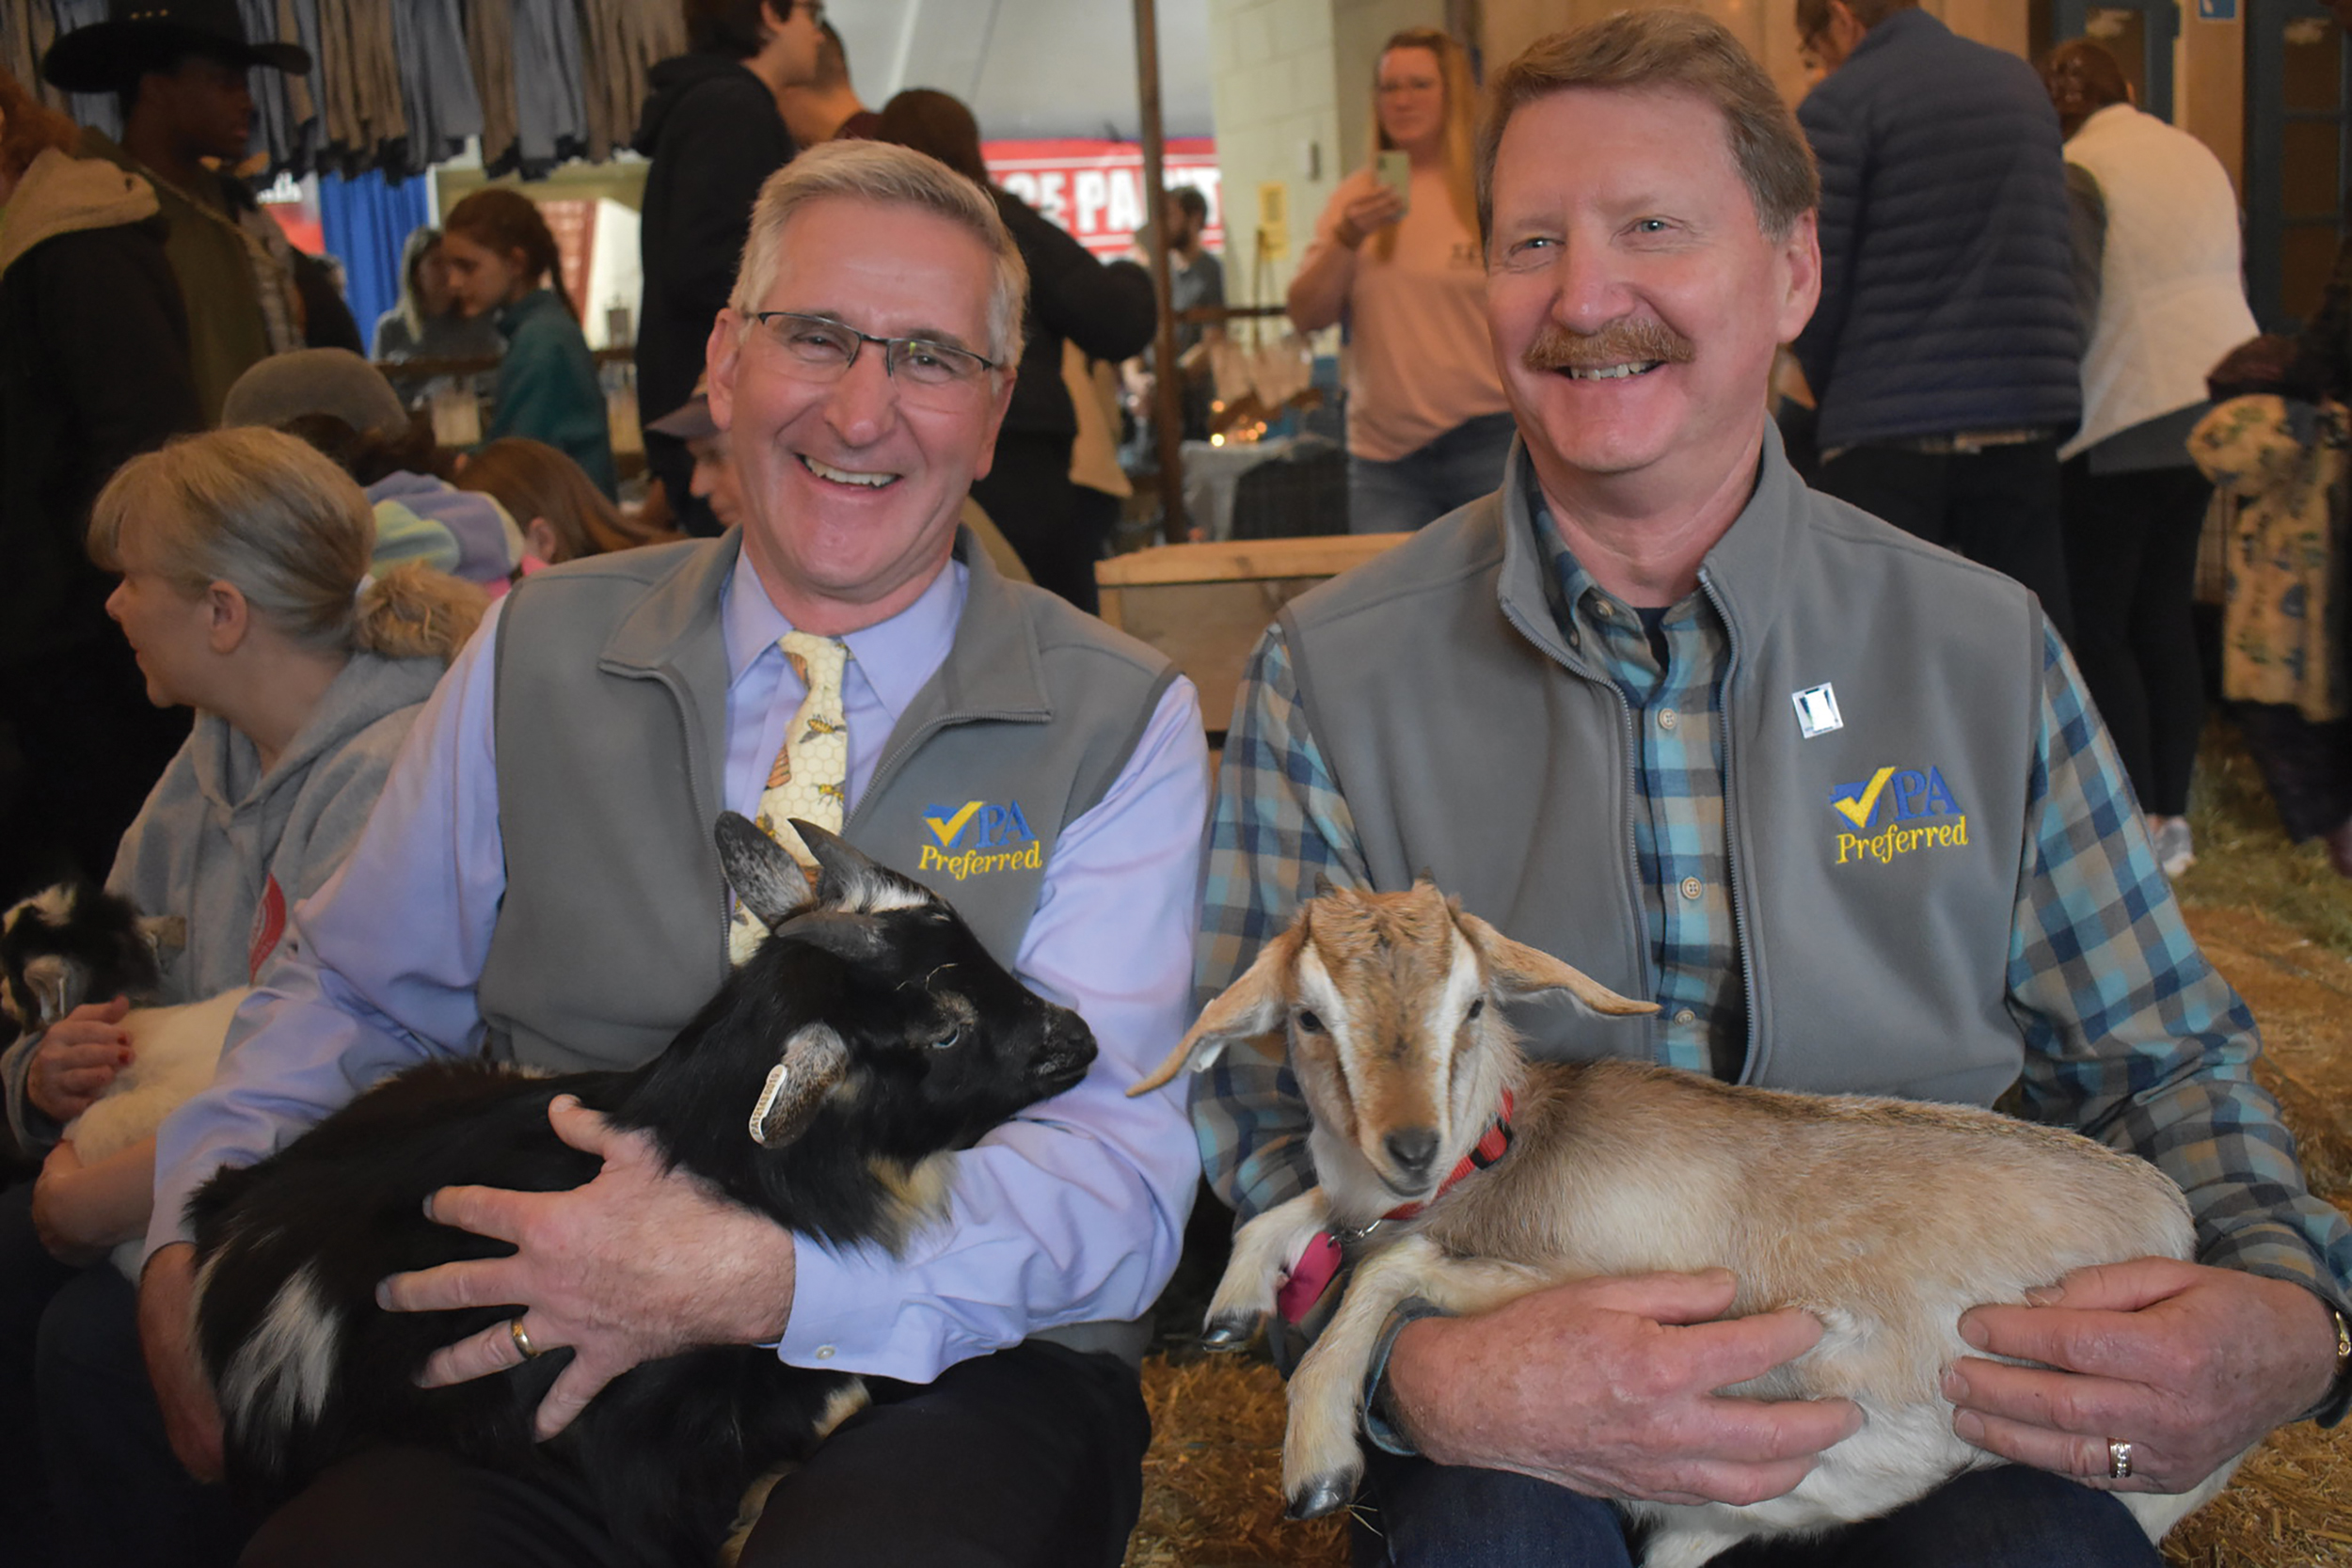 State Secretary of Agriculture Russel Redding and state Sen. Elder A. Vogel Jr. (R-Beaver) enjoy goat snuggling, a new experience at this year's Farm Show.